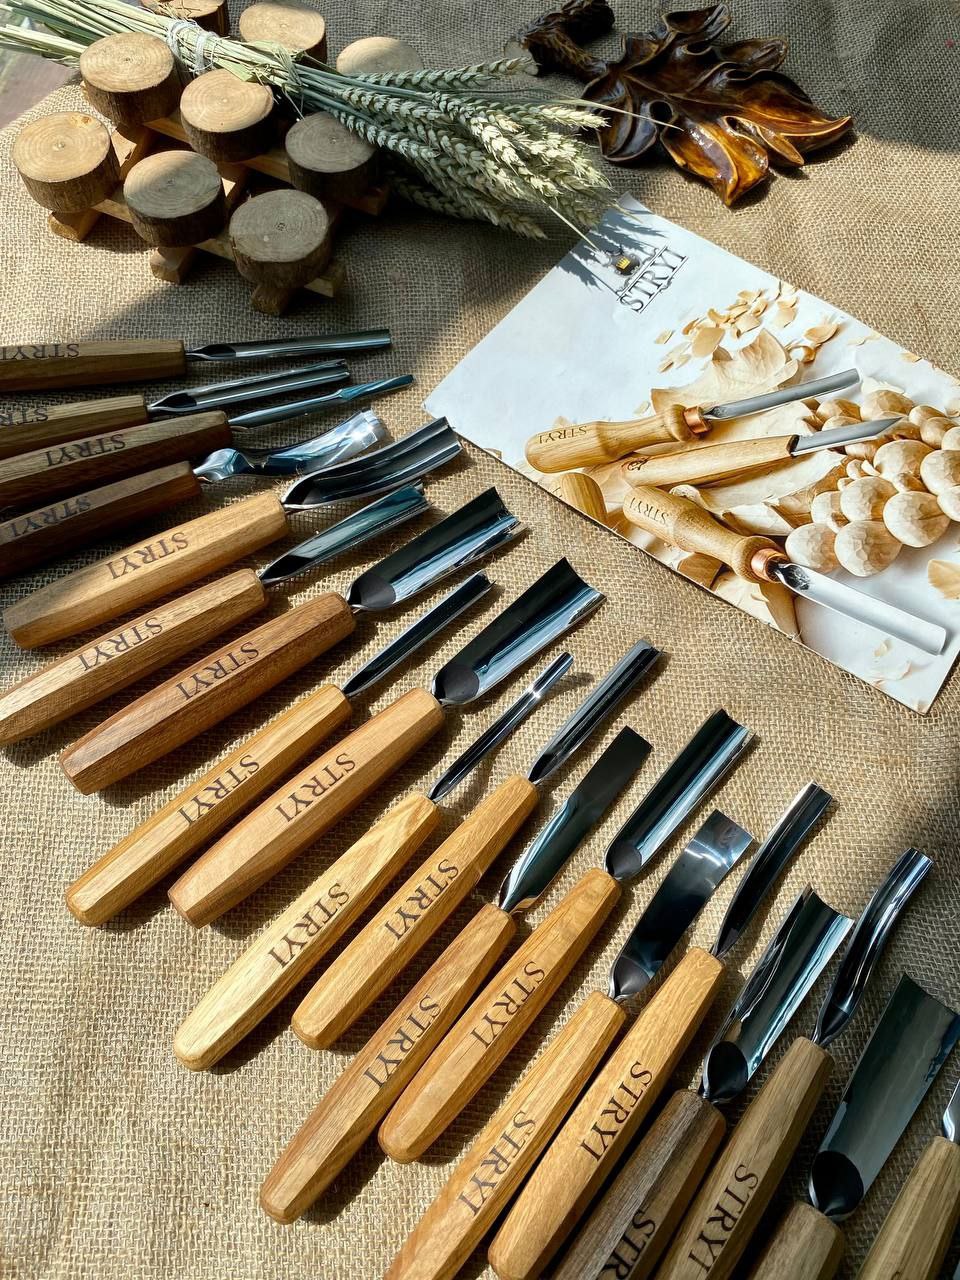 Wood carving tools set for relief carving, scrabbling after